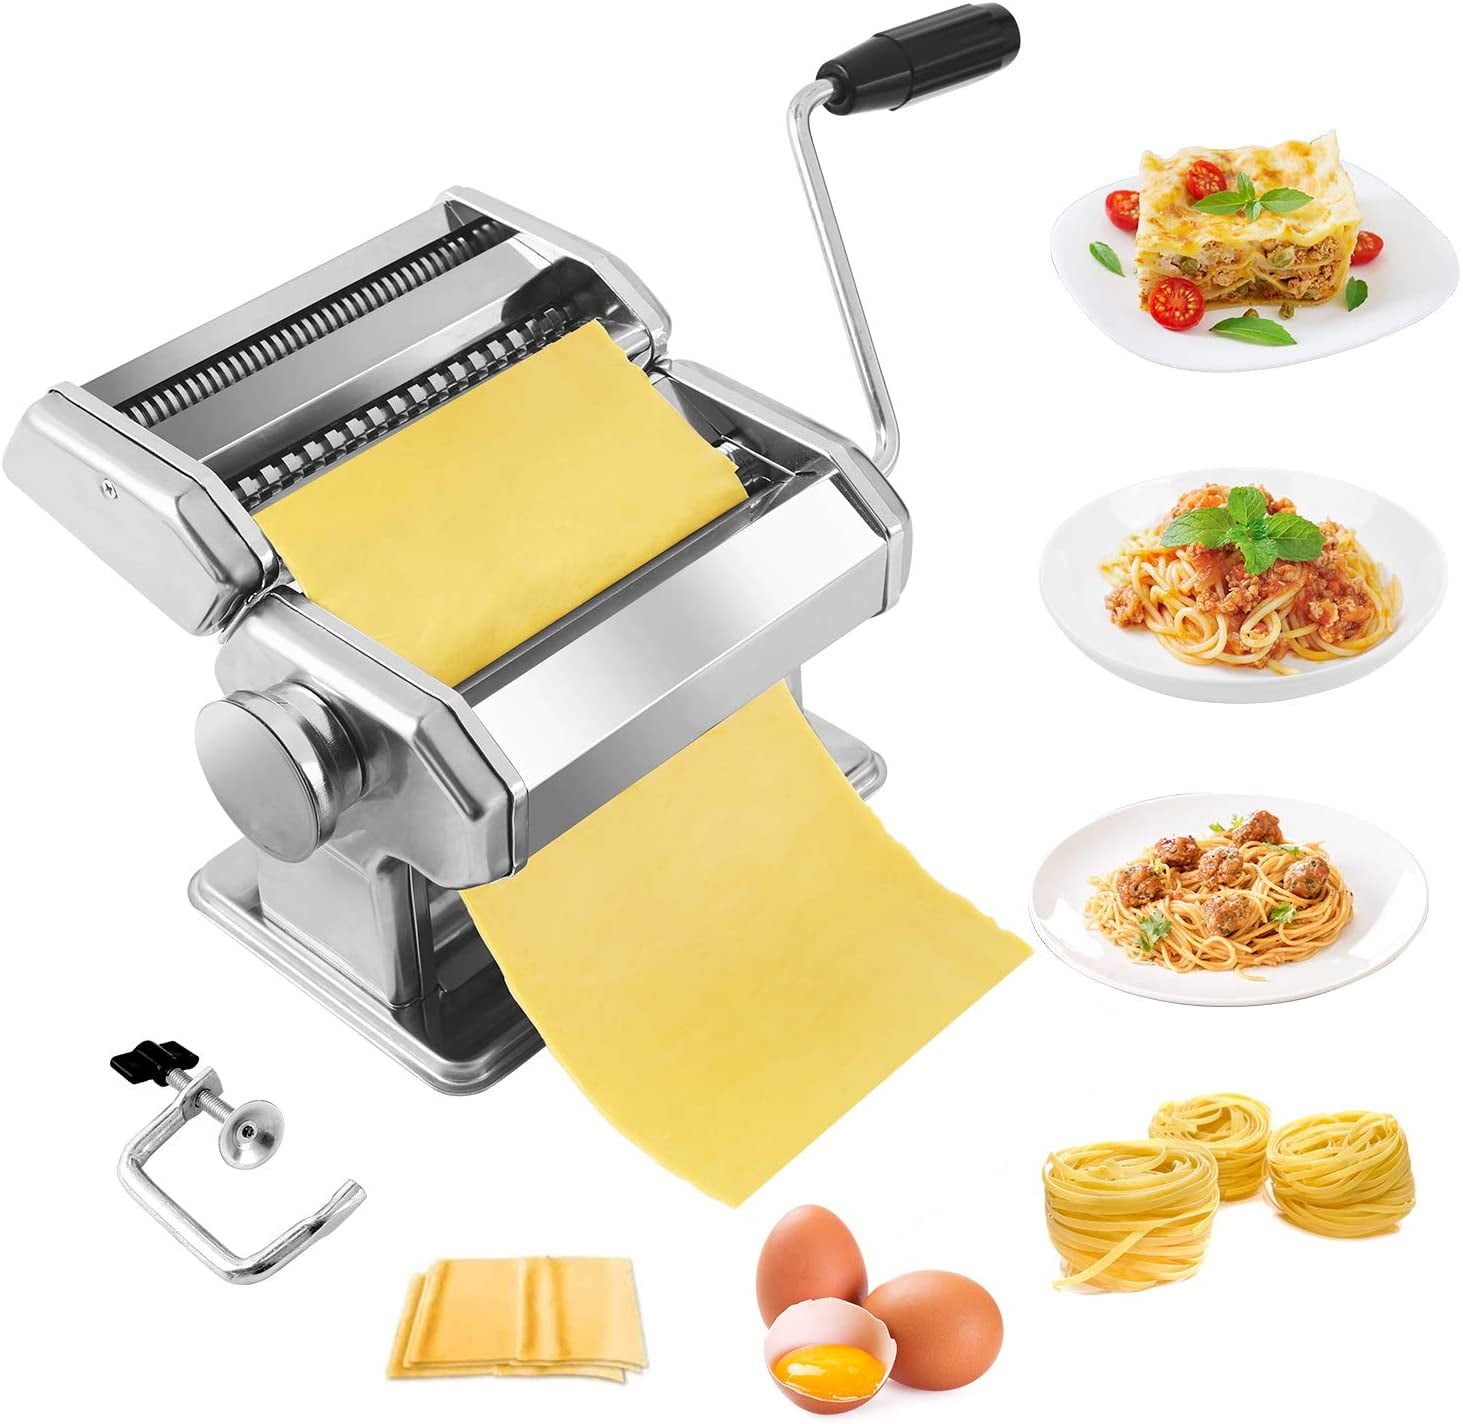 VEVOR Pasta Maker Machine 9 Adjustable Thickness Settings Noodles Maker  Manual Hand Press Pasta Making Kitchen Tool Kit QMJYSFSD15CM0RP1YV0 - The  Home Depot